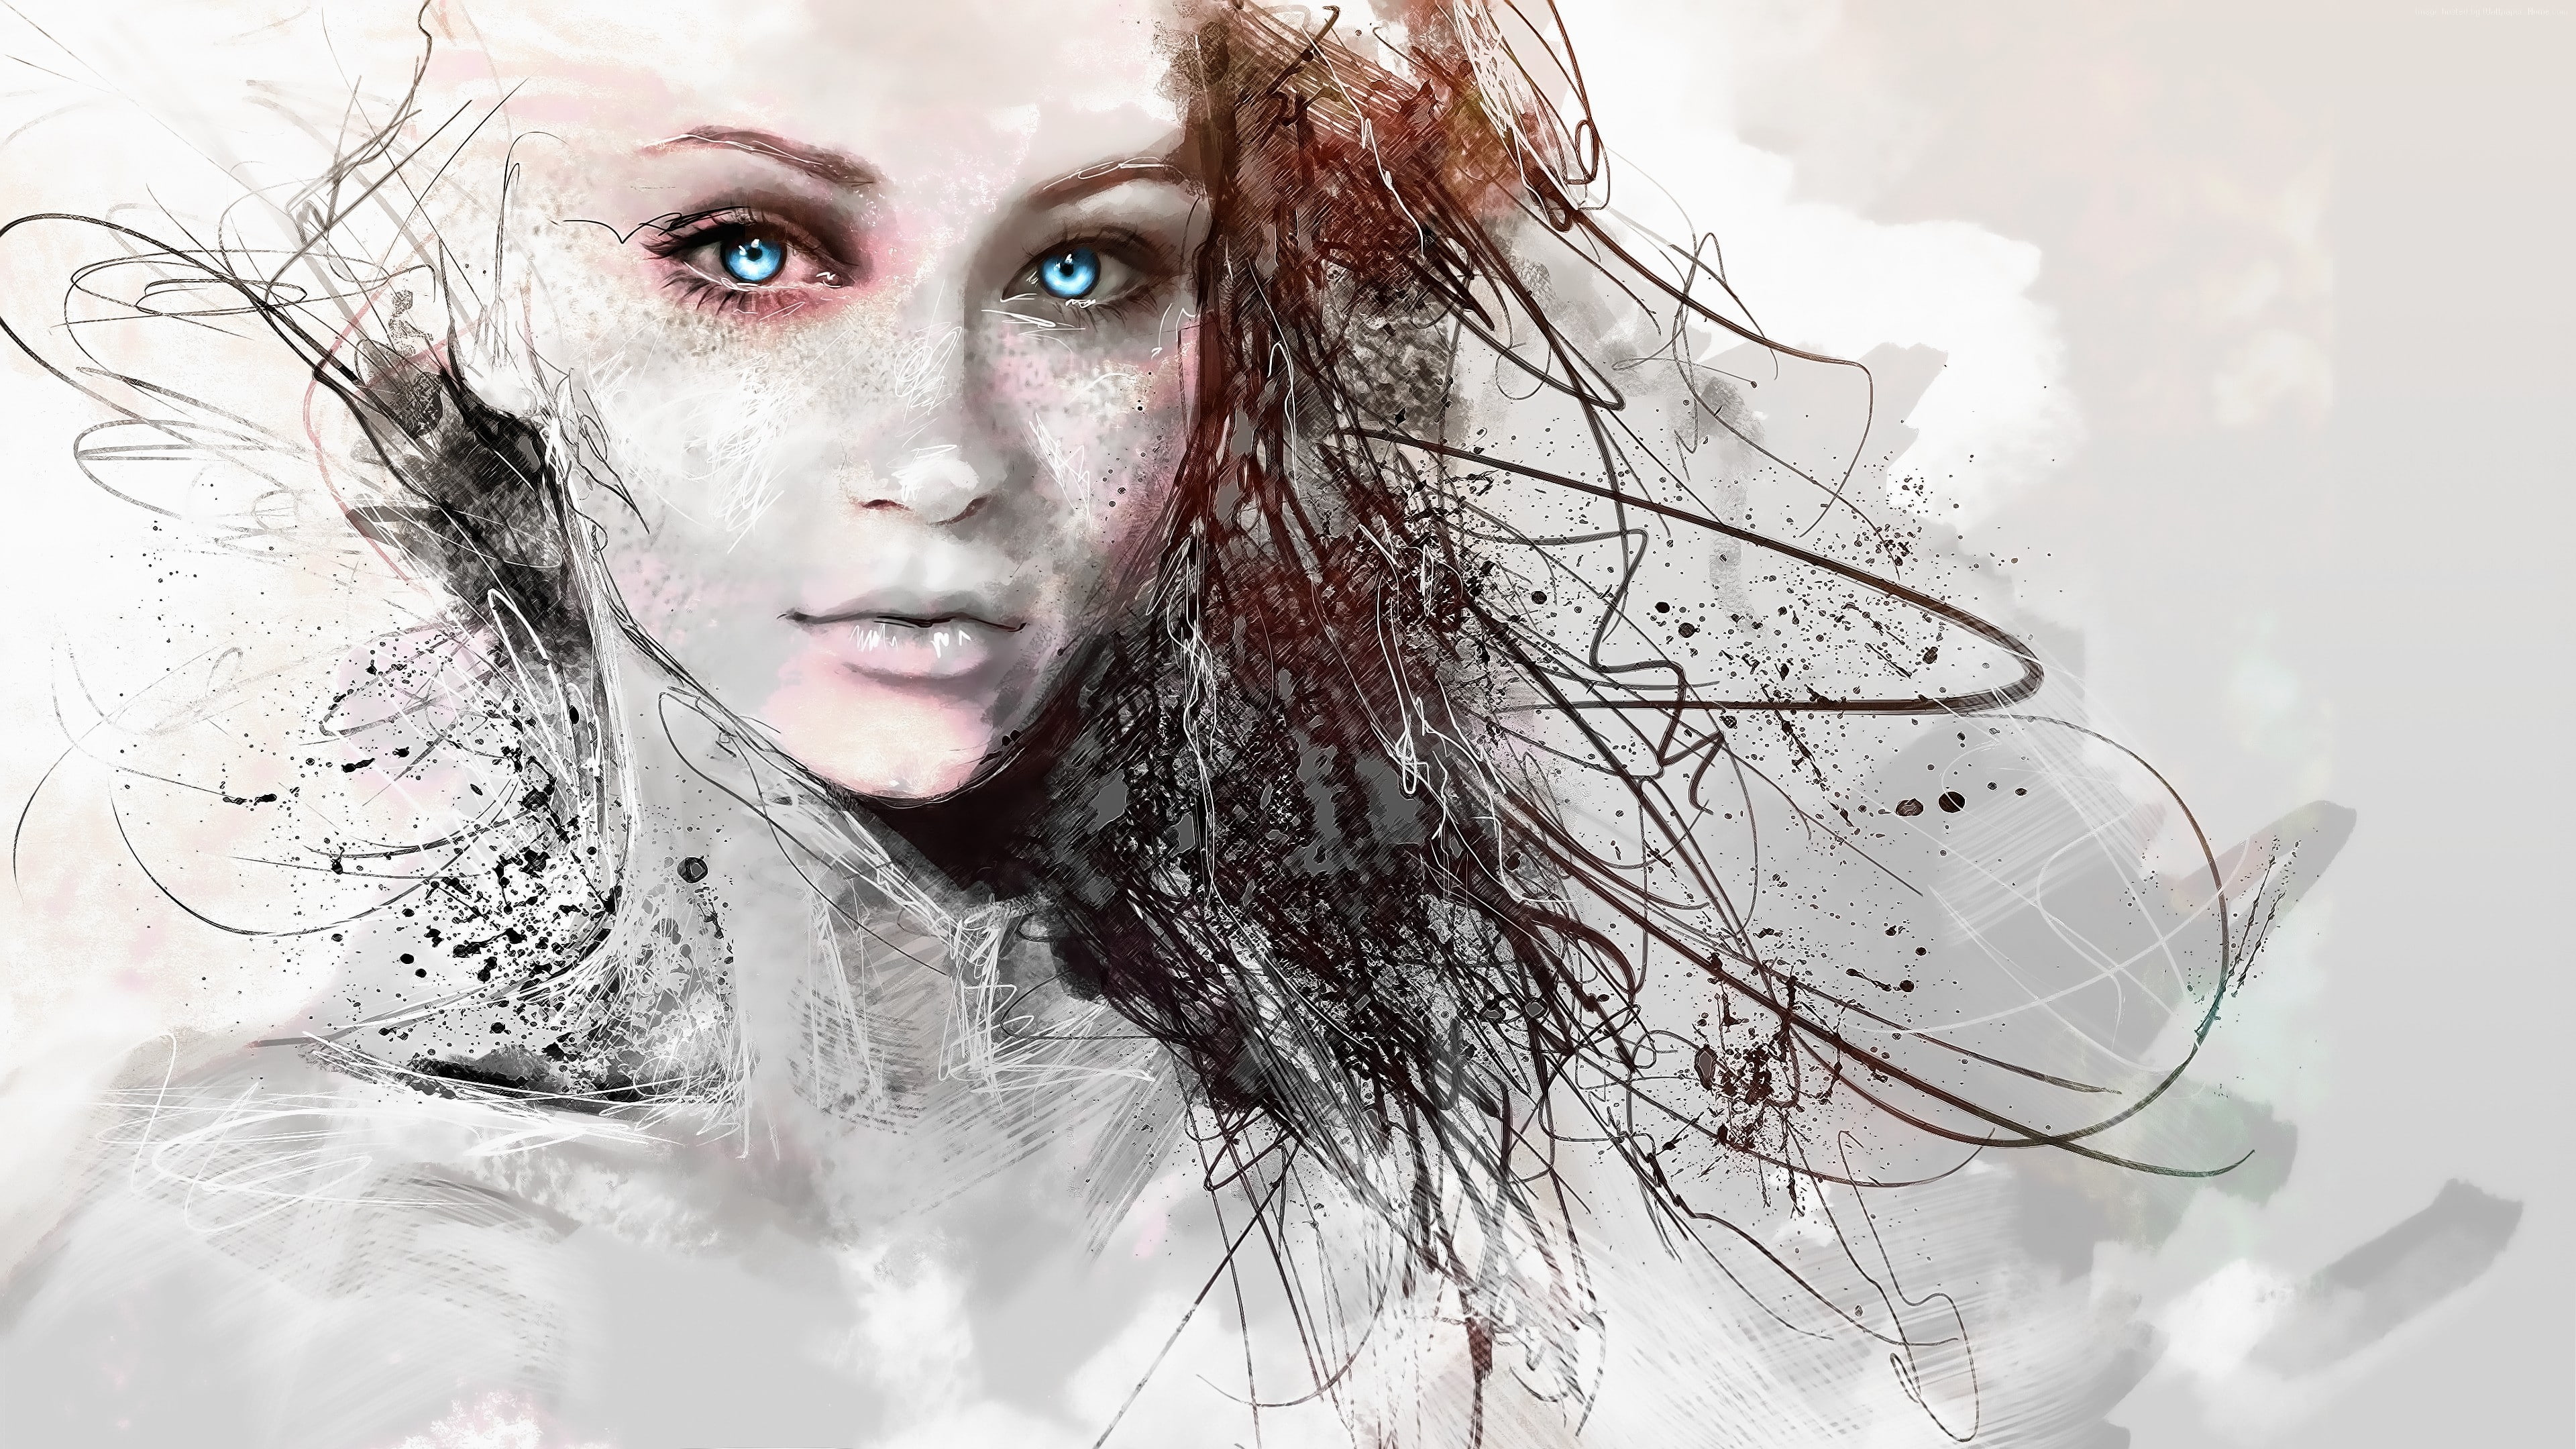 blue eyes, girl, graphics, face, beauty, drawing, eyebrow, artwork